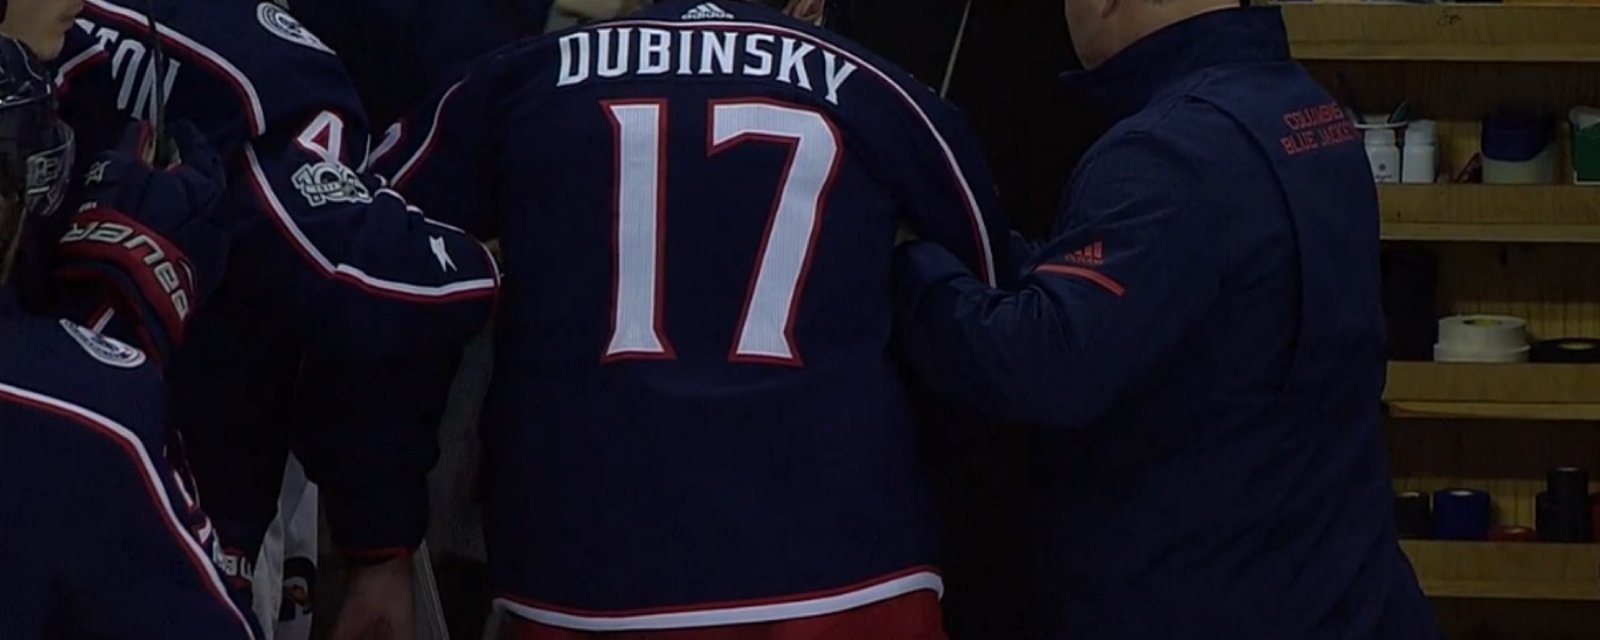 Insider reveals just how messed up Dubinsky's face is after beating from Kassian.